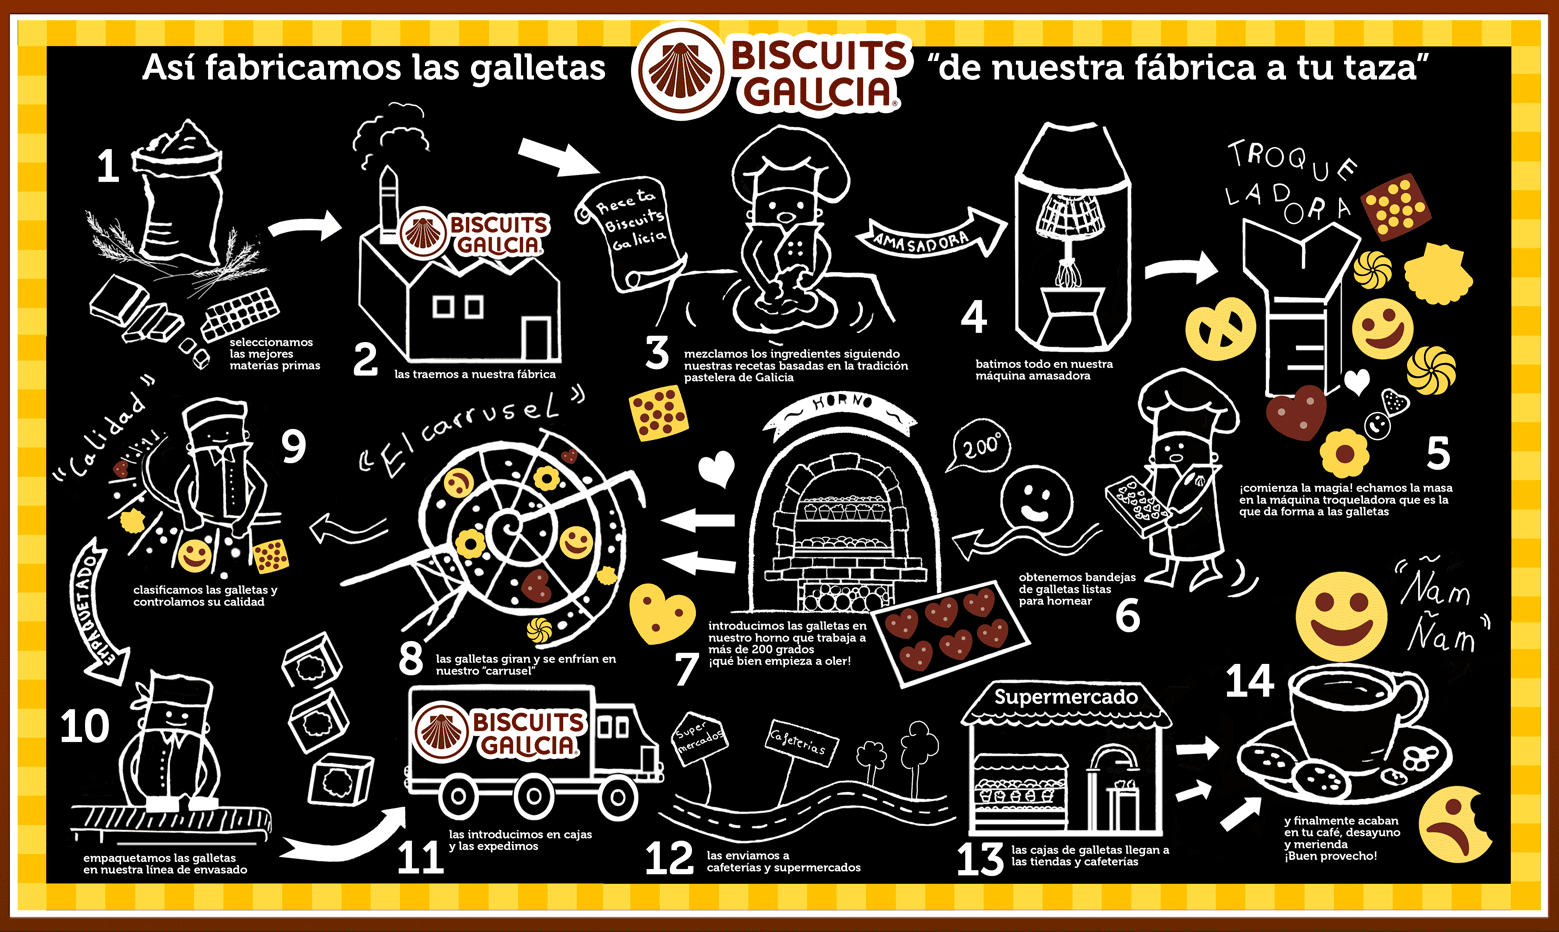 proceso-productivo-biscuits-galicia